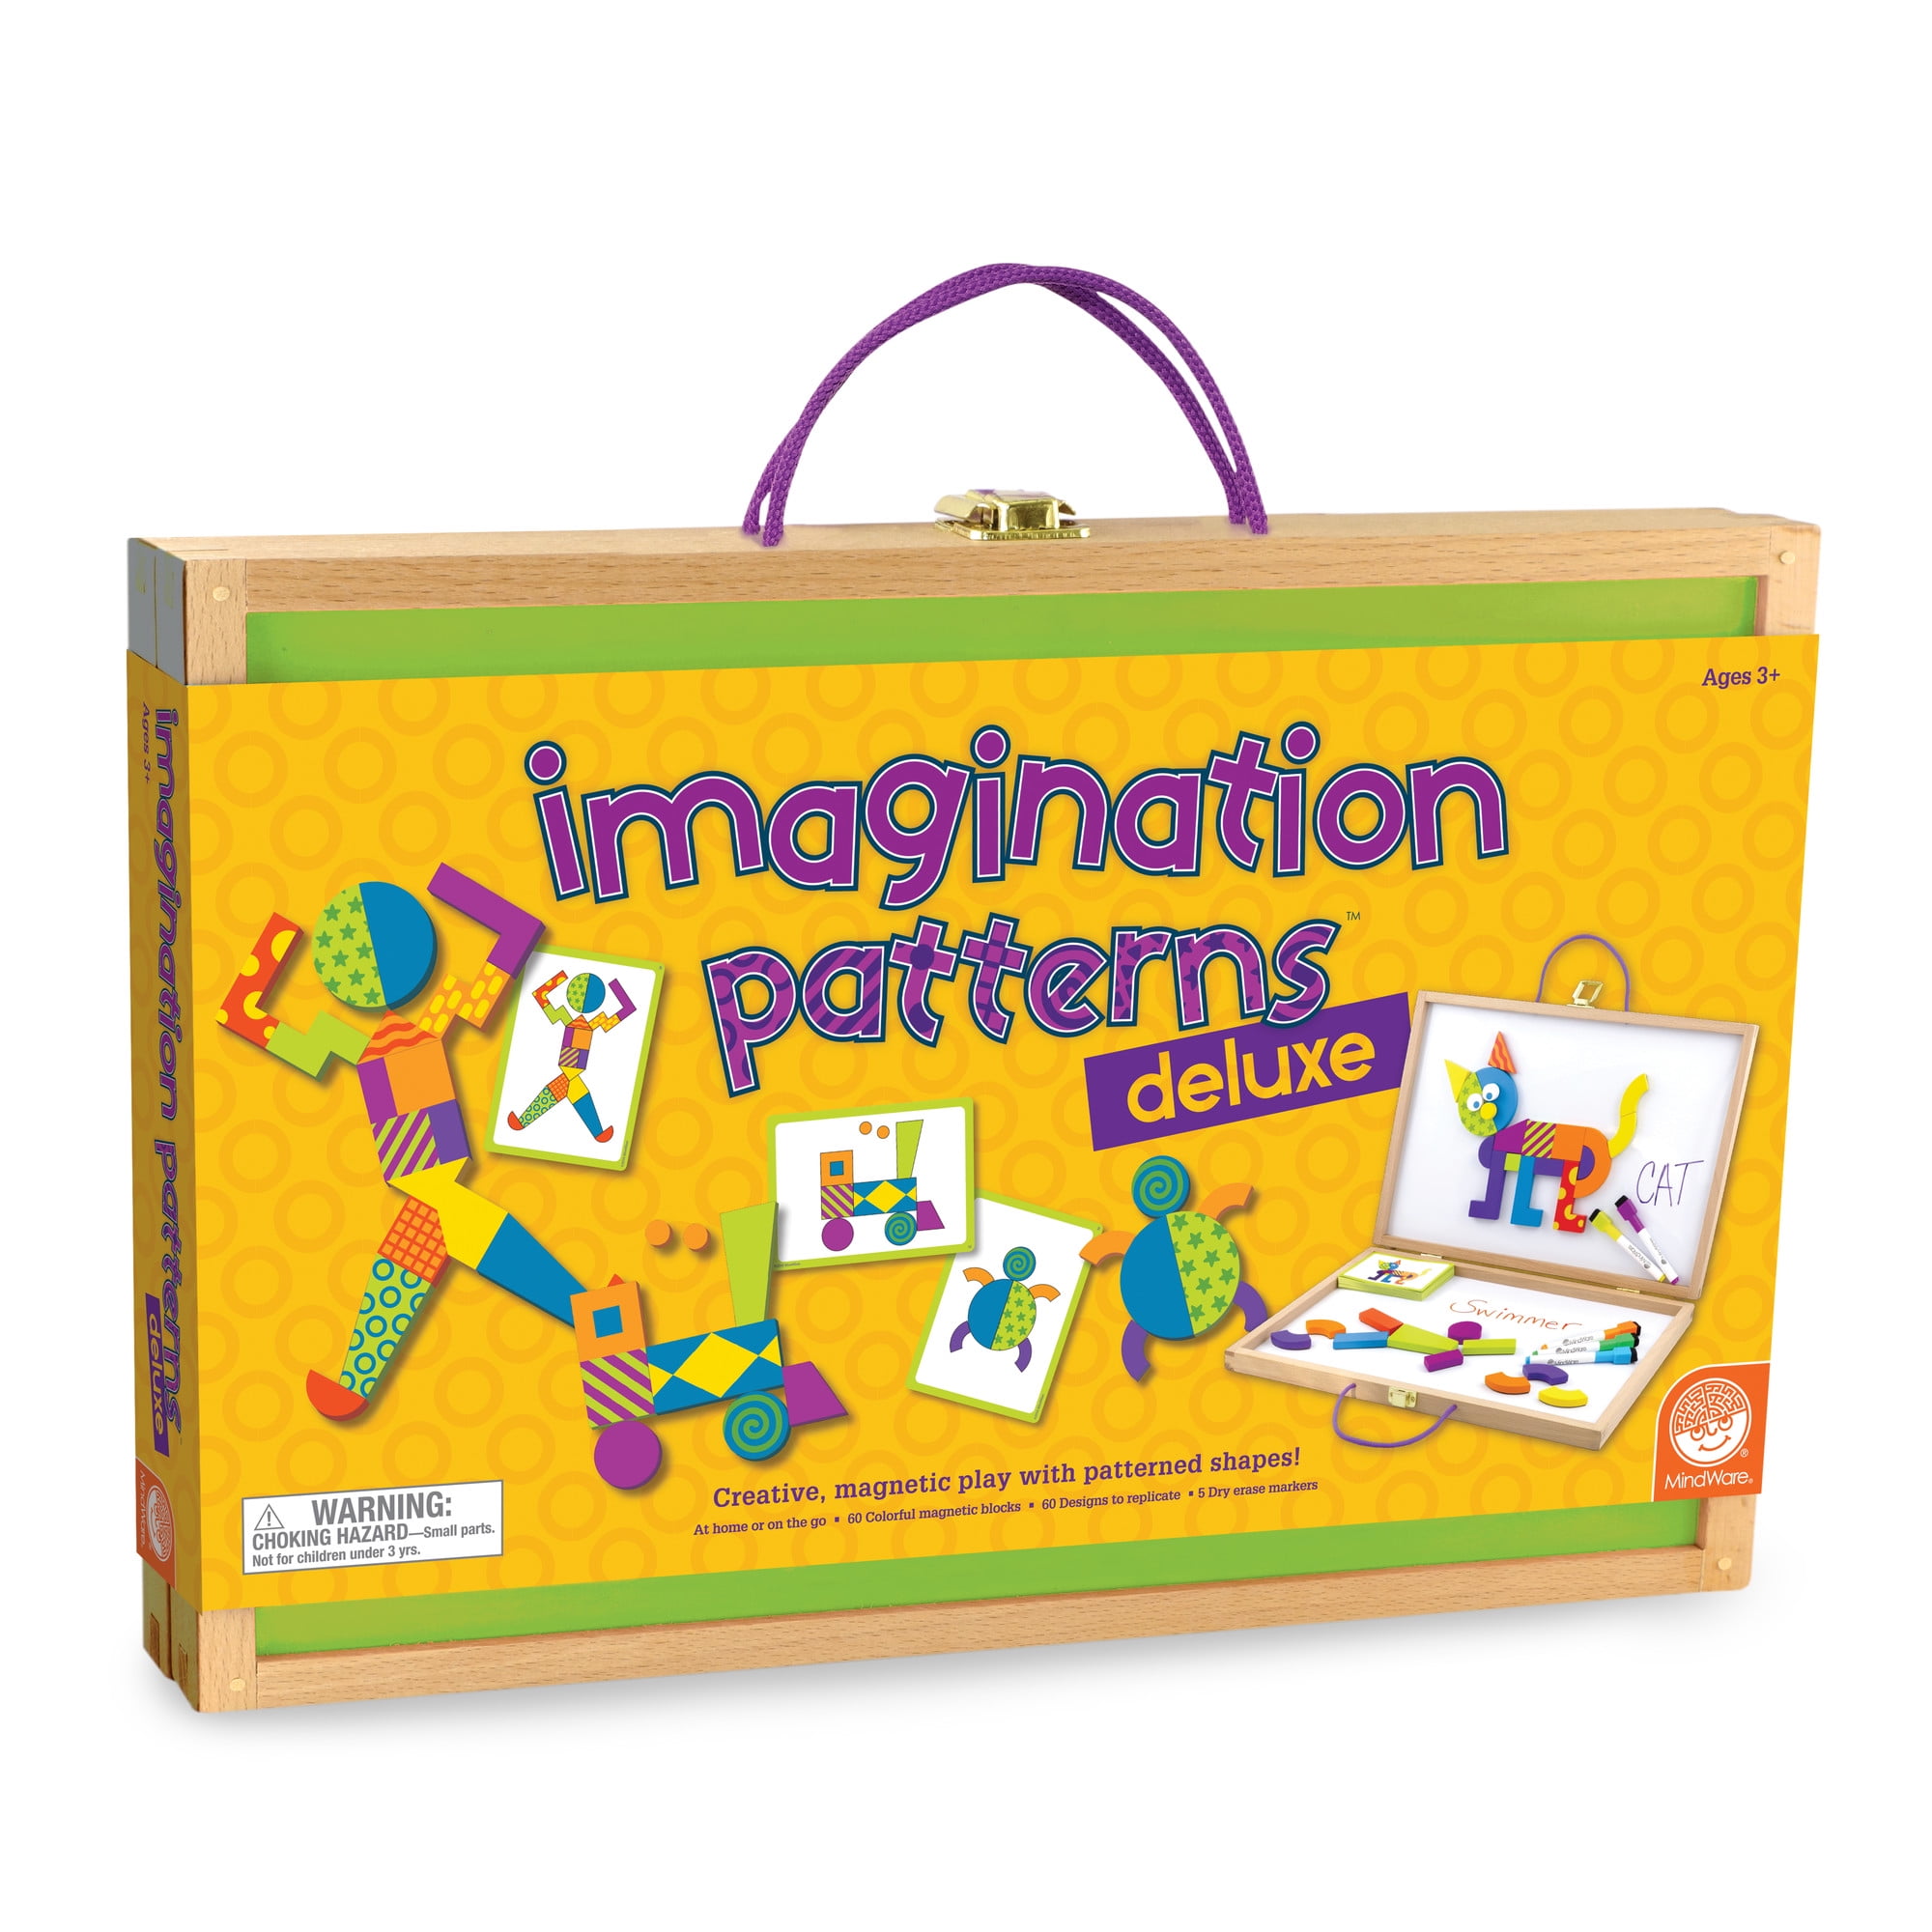 IMAGINETS MAGNETIC SHAPES Mindware Design Cards FOLDS Into Wood Case Age 3+  READ